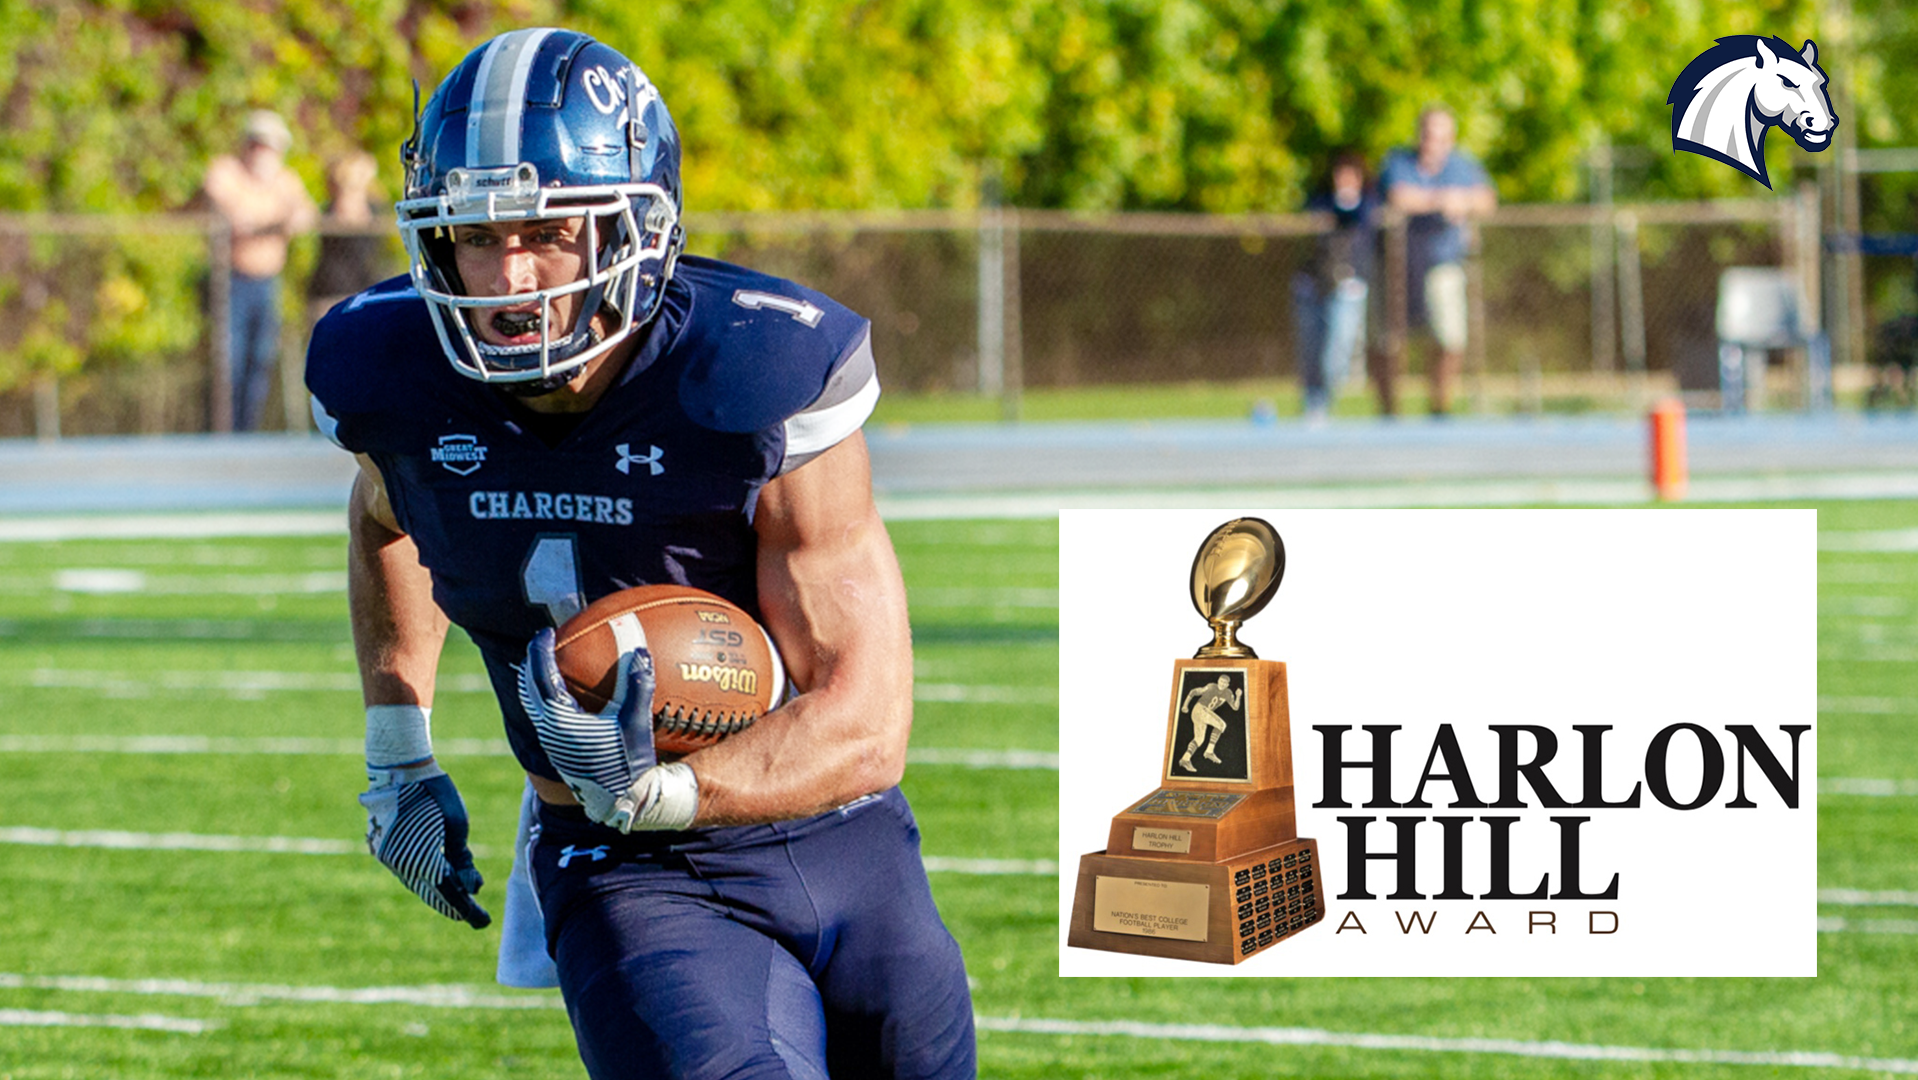 Chargers' Michael Herzog named as one of nine finalists for 2023 Harlon Hill Award